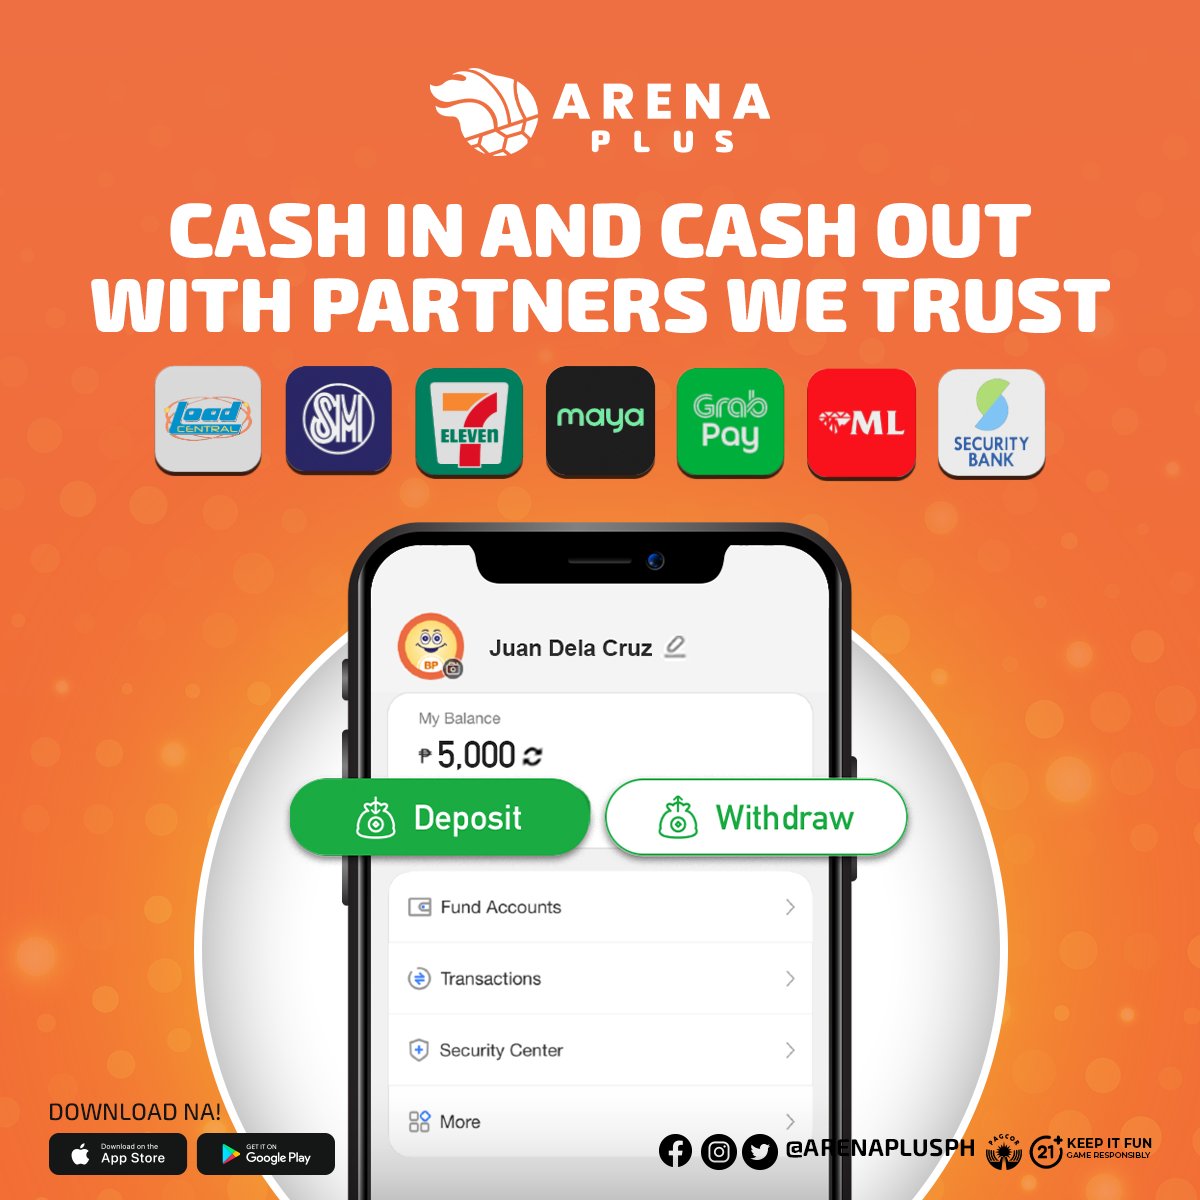 Sa mga ka-ArenaPlus, cash in and cash out with our trusted partners and take part in the action pagdating sa favorite sports mo! ⚾️

#ArenaPlusPH #AstigSaSports #sportsbetting #sportsbook #onlinebetting #betting #sports #basketball #football #ballislife #boxing #racing #ufc